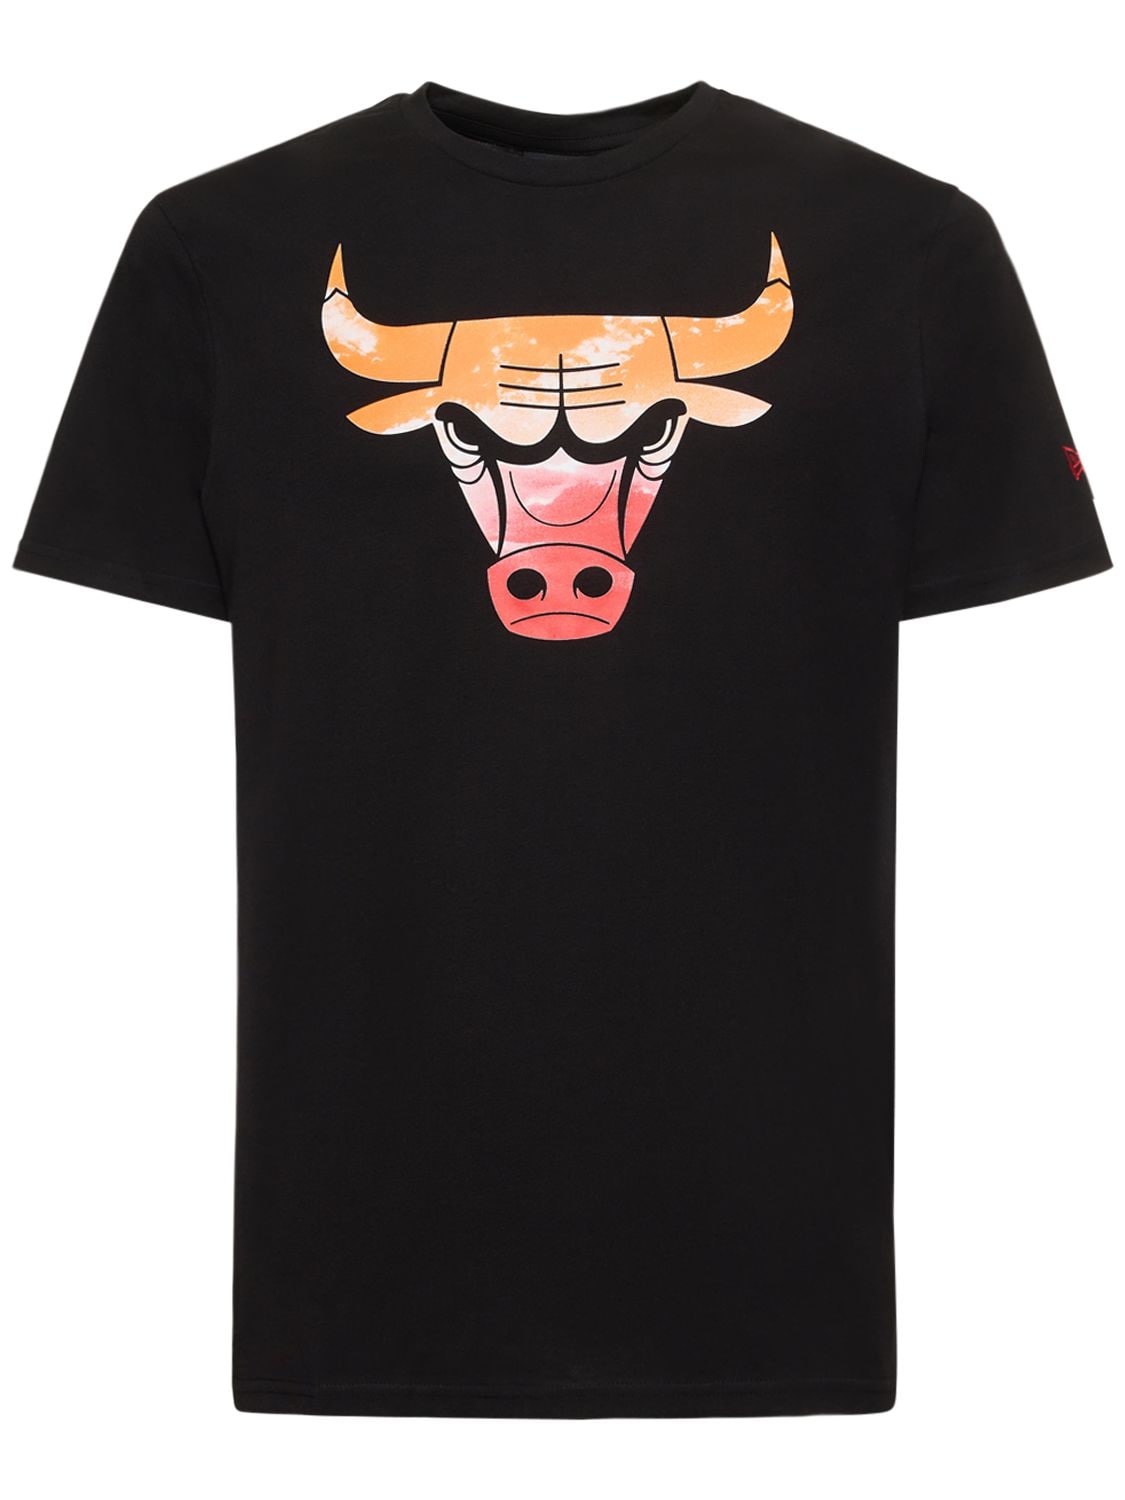 Image of Chicago Bulls Printed Cotton T-shirt